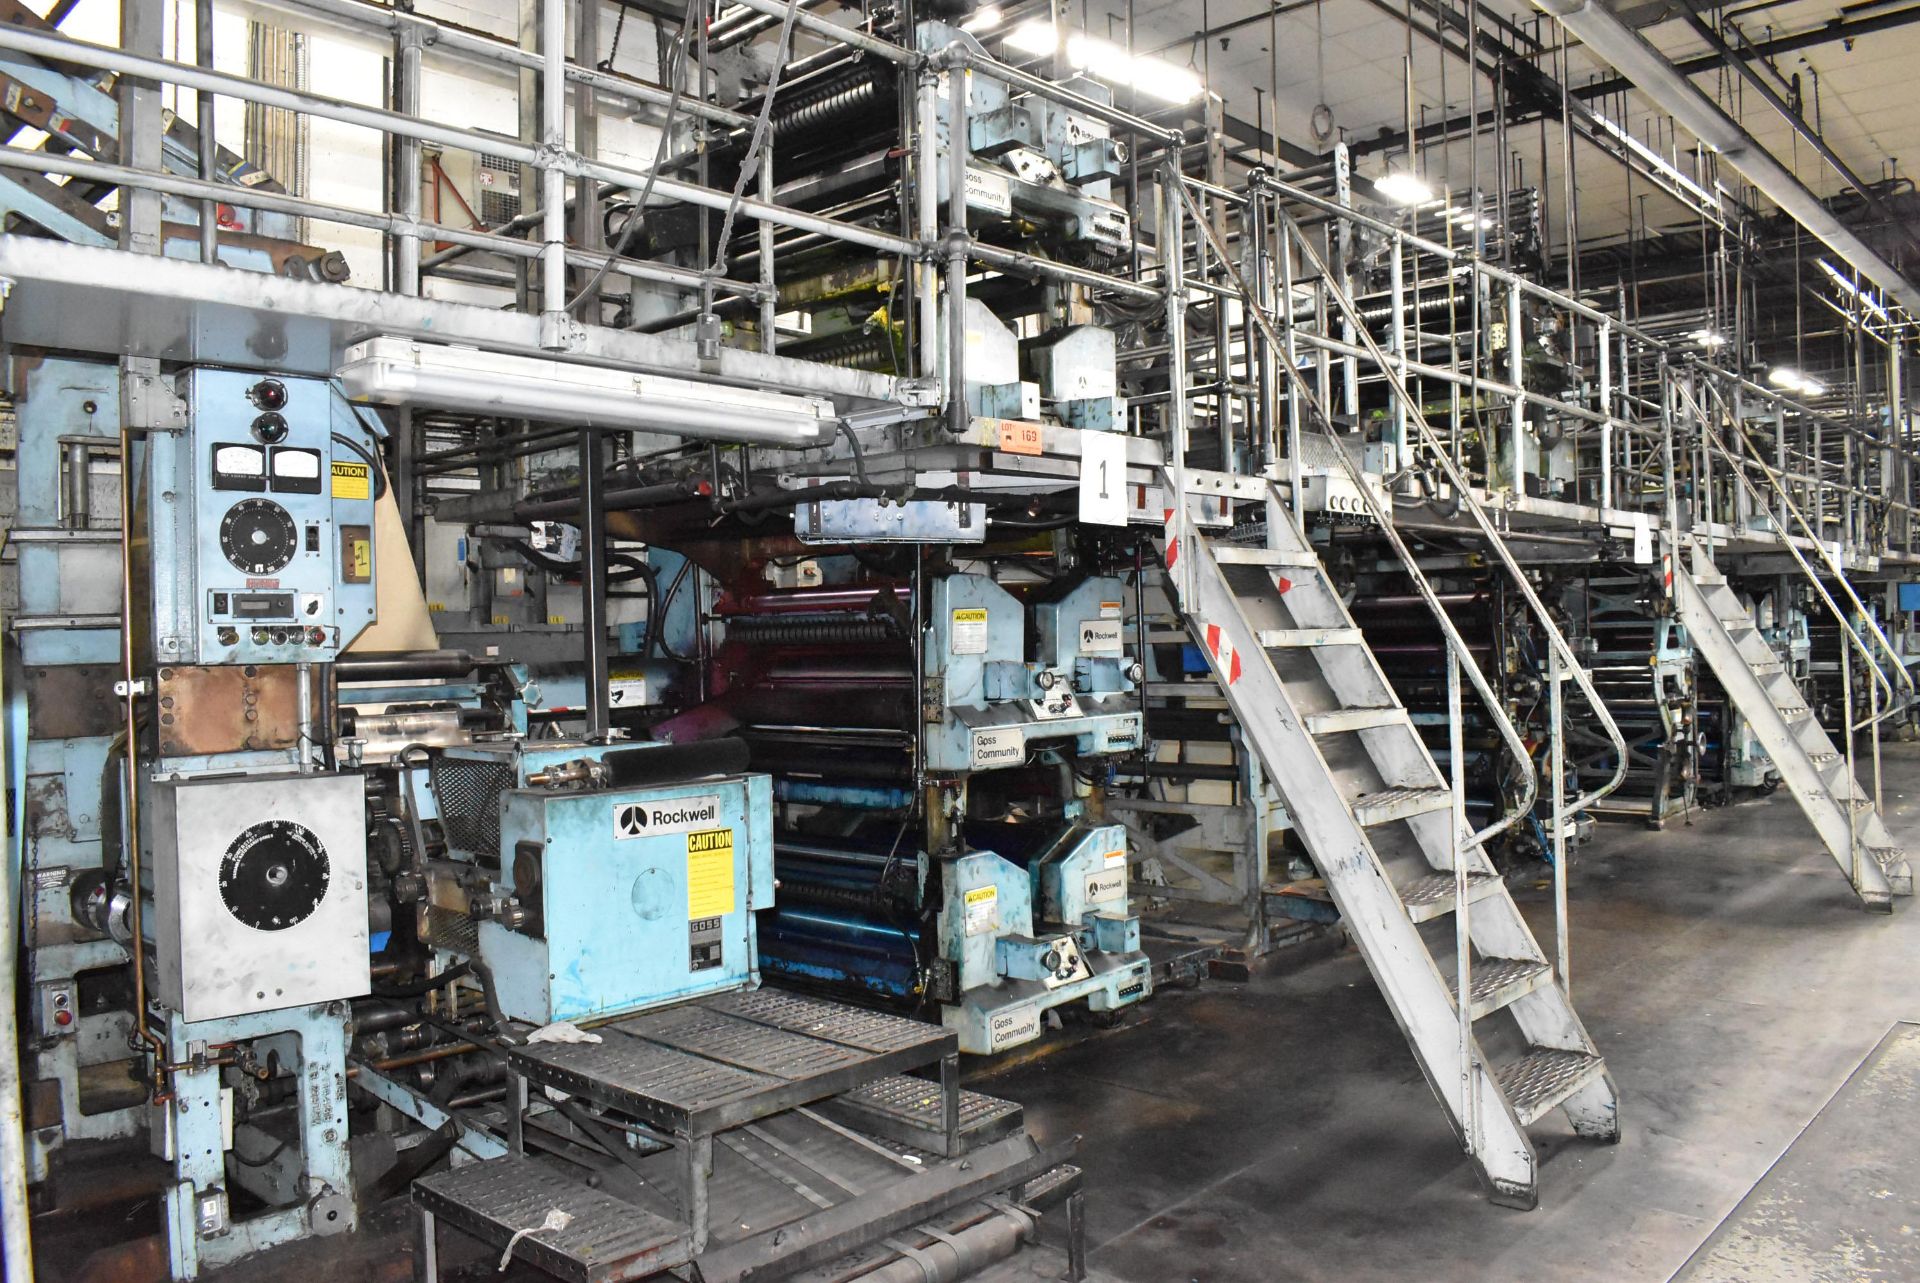 GOSS COMMUNITY-ROCKWELL WEB OFFSET NEWSPRINT PRINTING LINE COMPOSED OF (4) 4-HIGH INTERLINKED,